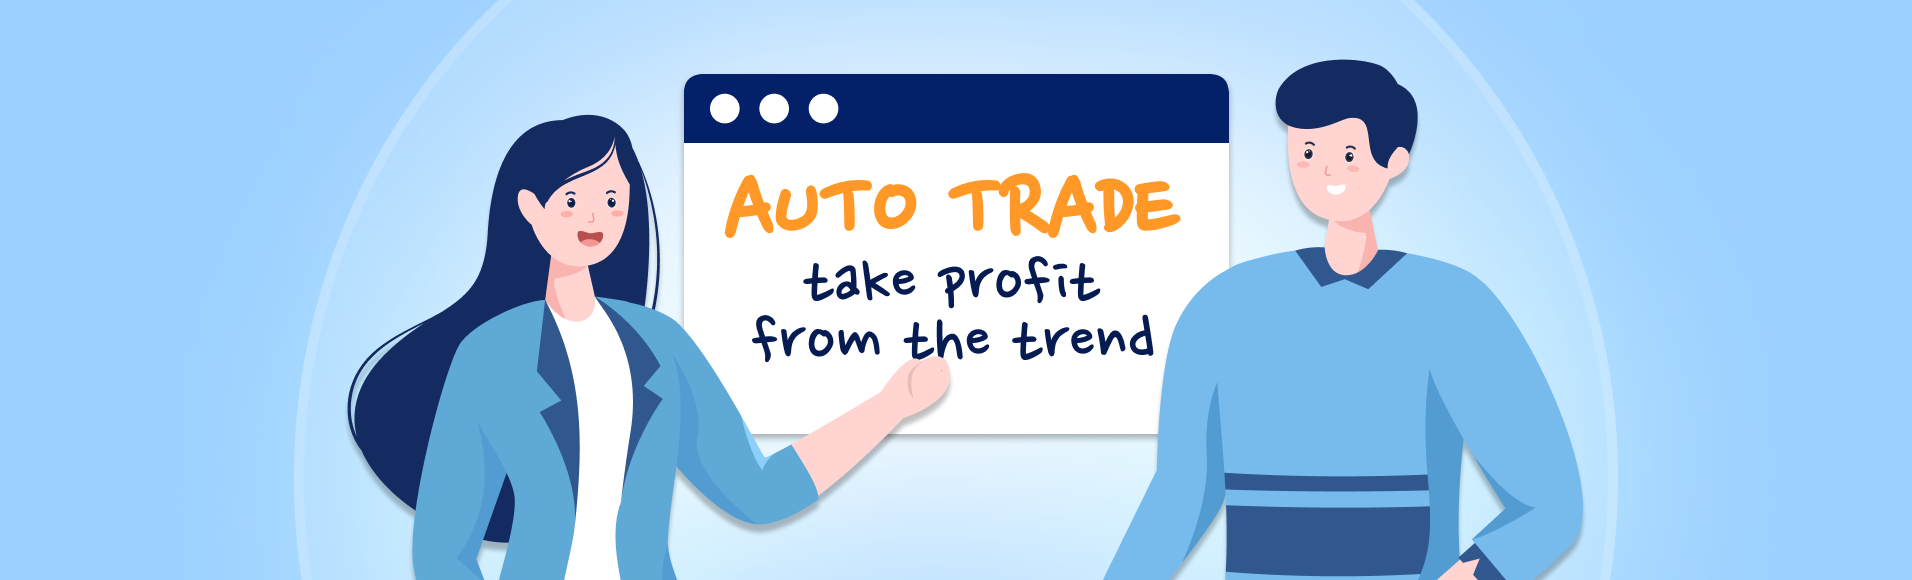 Auto trade: take profit from the trend